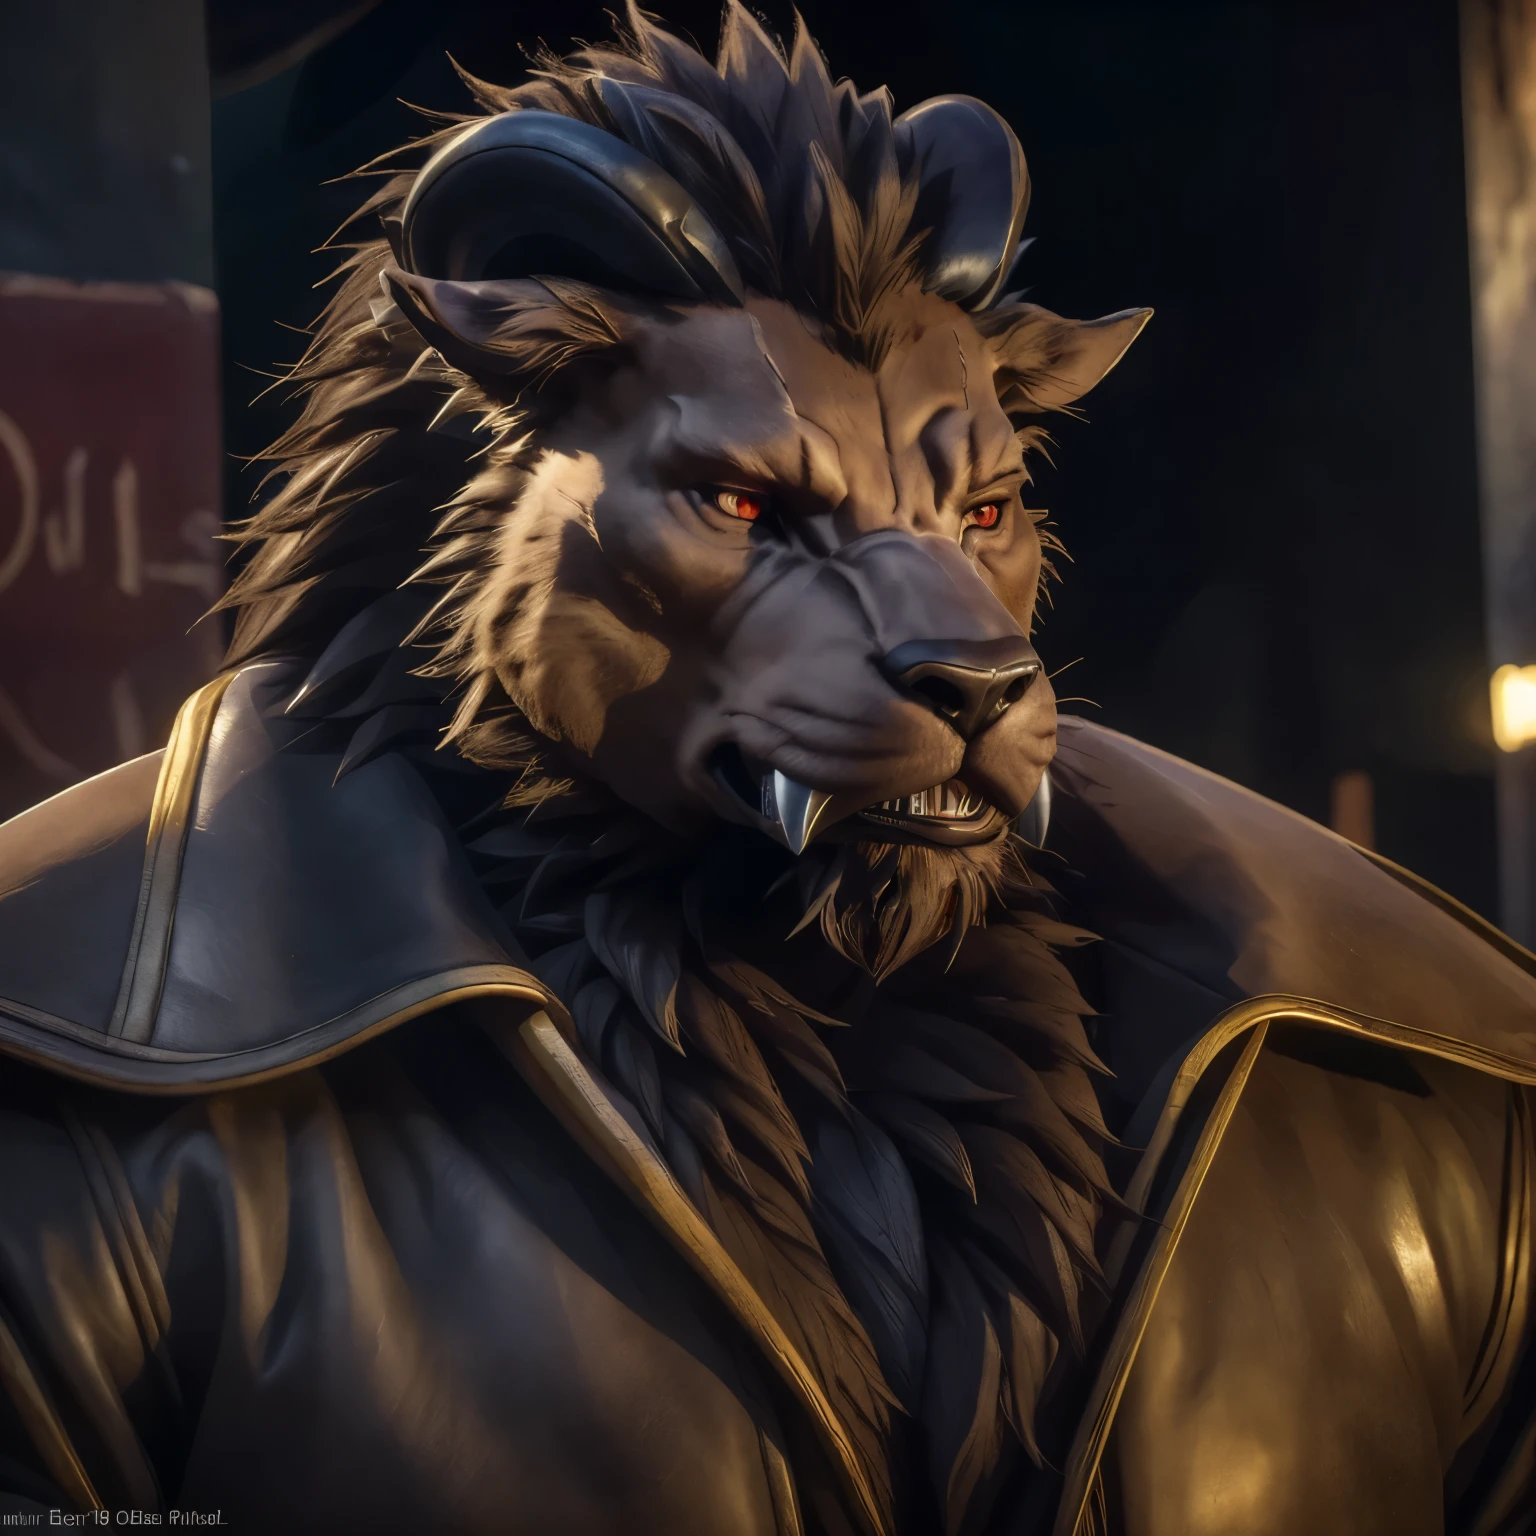 (highest quality, 32K High resolution:1.2, Very detailed, Realistic, photoRealistic, masterpiece,) Official Art, The Sacrificed Princess and the King of Beasts, Full Body View, Looking at the audience, male, good looking, Majestic Beast, Dark sienna brown fur, Black Mane, Majestic King, King Leonhard, Muscular body, Crimson Eyes, Serious look , Small ears, Curved black horns, Long upper jaw crab teeth, (detailed Realistic image:1.3), (Fine grain, Beautiful and expressive eyes:1), (hyper Realistic fur:1.2), (Fur with attention to detail:1. ( Detailed face:1) Low Light: 1.2) masterpiece, highest quality, ultra Realistic ( 8k, 超High resolution, Beautiful light and shadow, Detailed faceの描写, highest quality, masterpiece, Ultra high definition, Official Art, Super detailed, Deep Shadow, Dynamic Shadows, High resolution, Profound, utra Fur with attention to detail, Maximum concentration, Depth of written boundary, Perfect lighting, Lightest particle quality, Super-detailed body, Cinematic, Sharp focus, Correct Anatomy, Right hand, The right move, Five fingers, Right Head, Detailed Background), (Intricate Details, Masterpiece, Best Quality, High Resolution, 8k), (1man), (male:1.2), old, aged up, exquisite face, angular jawline, finely detailed eyes and face, physique exudes strength and power, face portrait from an anthro male beast, RAW candid cinema, 16mm, color graded portra 400 film, remarkable color, ultra realistic, textured skin, remarkable detailed pupils, realistic dull skin noise, visible skin detail, skin fuzz, dry skin, shot with cinematic camera, high quality photography, 3 point lighting, flash with softbox, 4k, Canon EOS R3, hdr, smooth, sharp focus, high resolution, award winning photo, 80mm, f2.8, bokeh, face close